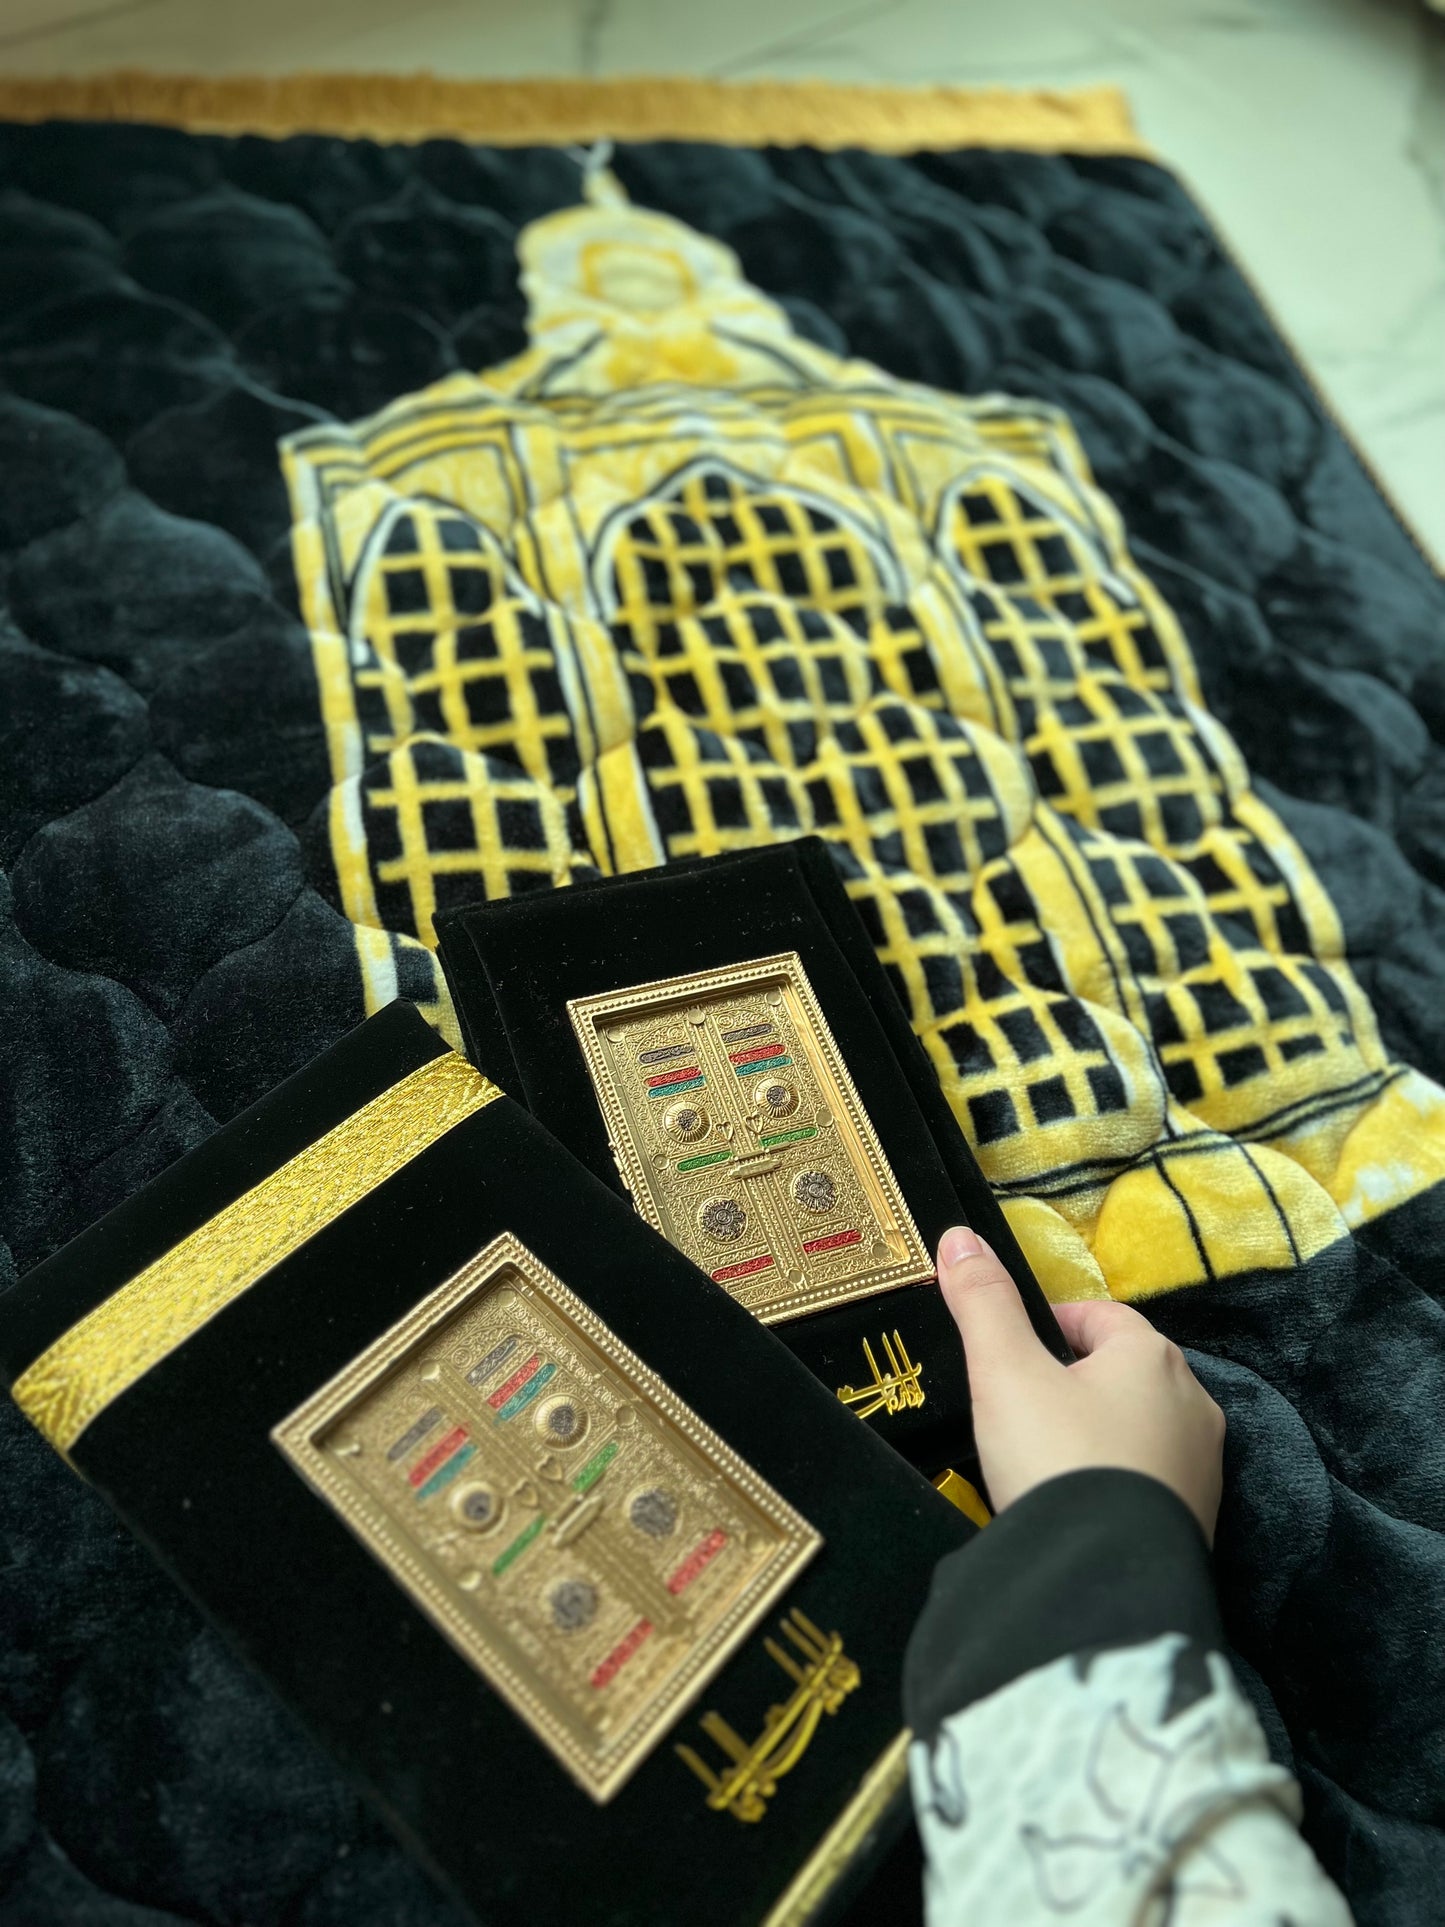 Special Kaaba Quran Gift with Prayer Mat